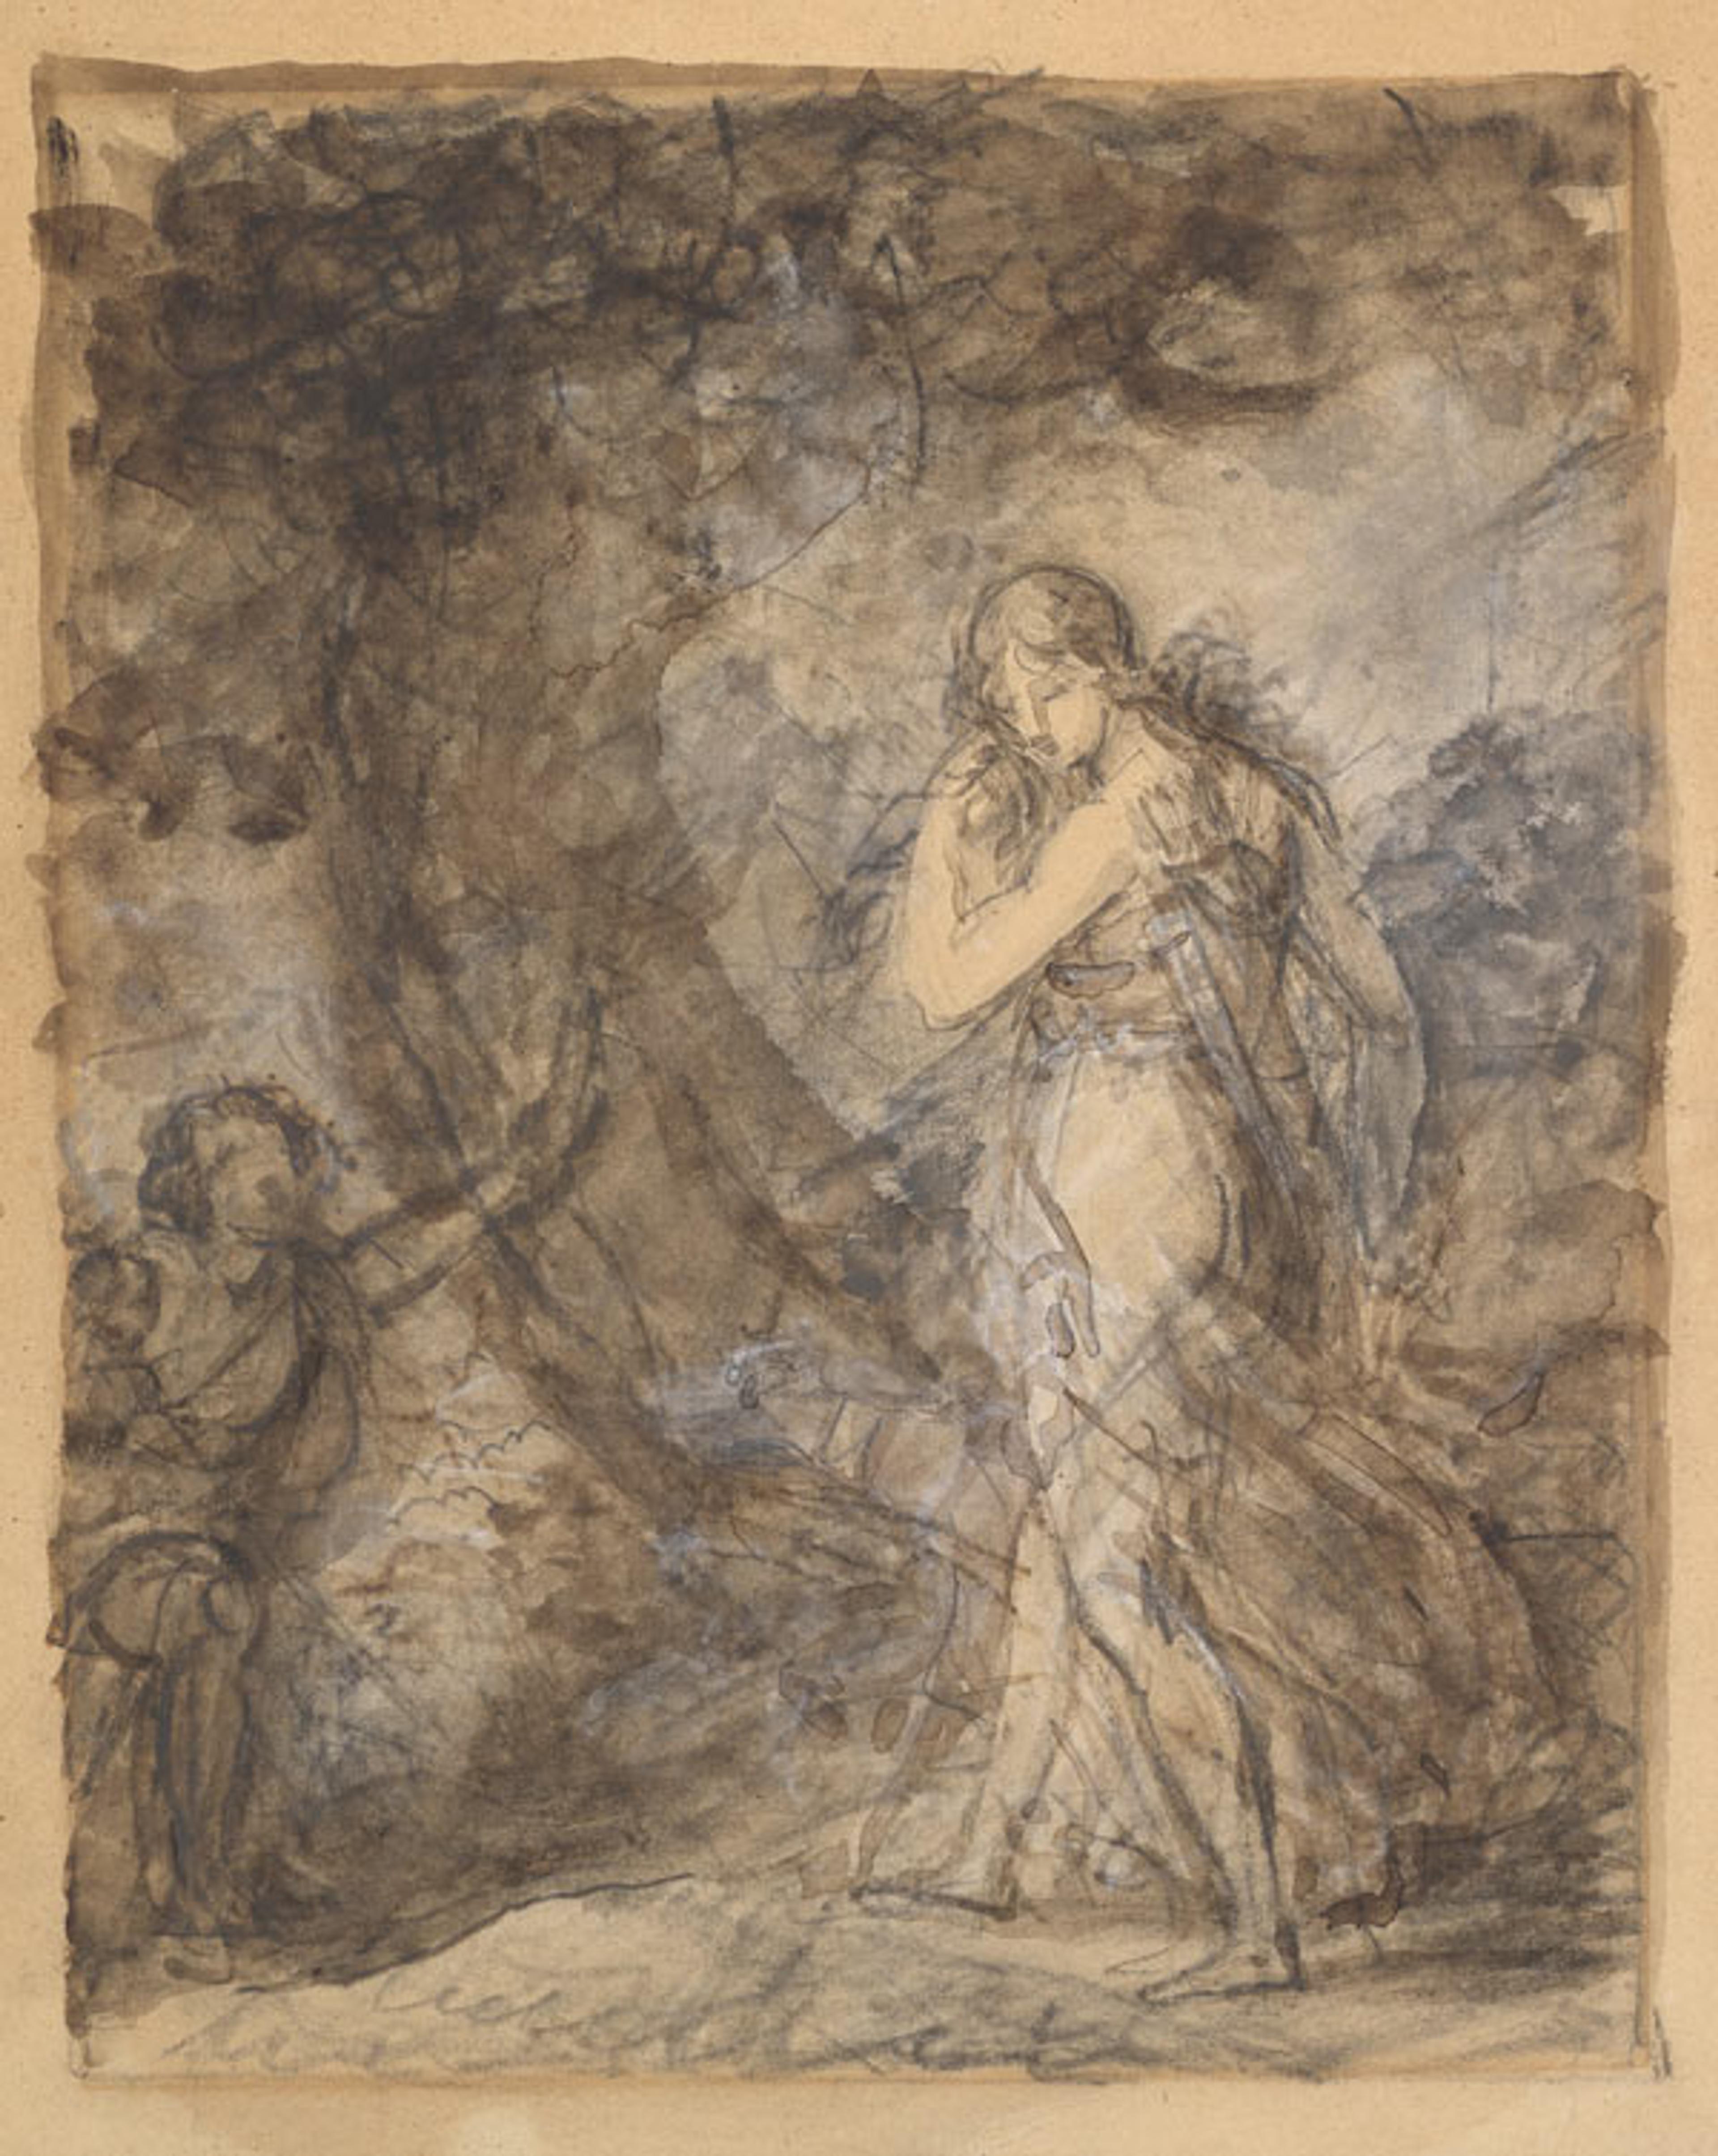 Baron François Gérard (French, 1770–1837). Daphnis Running toward Chloe, ca. 1798. Black chalk, brush with brown and gray wash, heightened with white gouache, on light tan wove paper; Sheet: 10 13/16 x 8 15/16 in. (27.5 x 22.7 cm). The Metropolitan Museum of Art, New York, Purchase, Guy Wildenstein Gift, 2012 (2012.234)